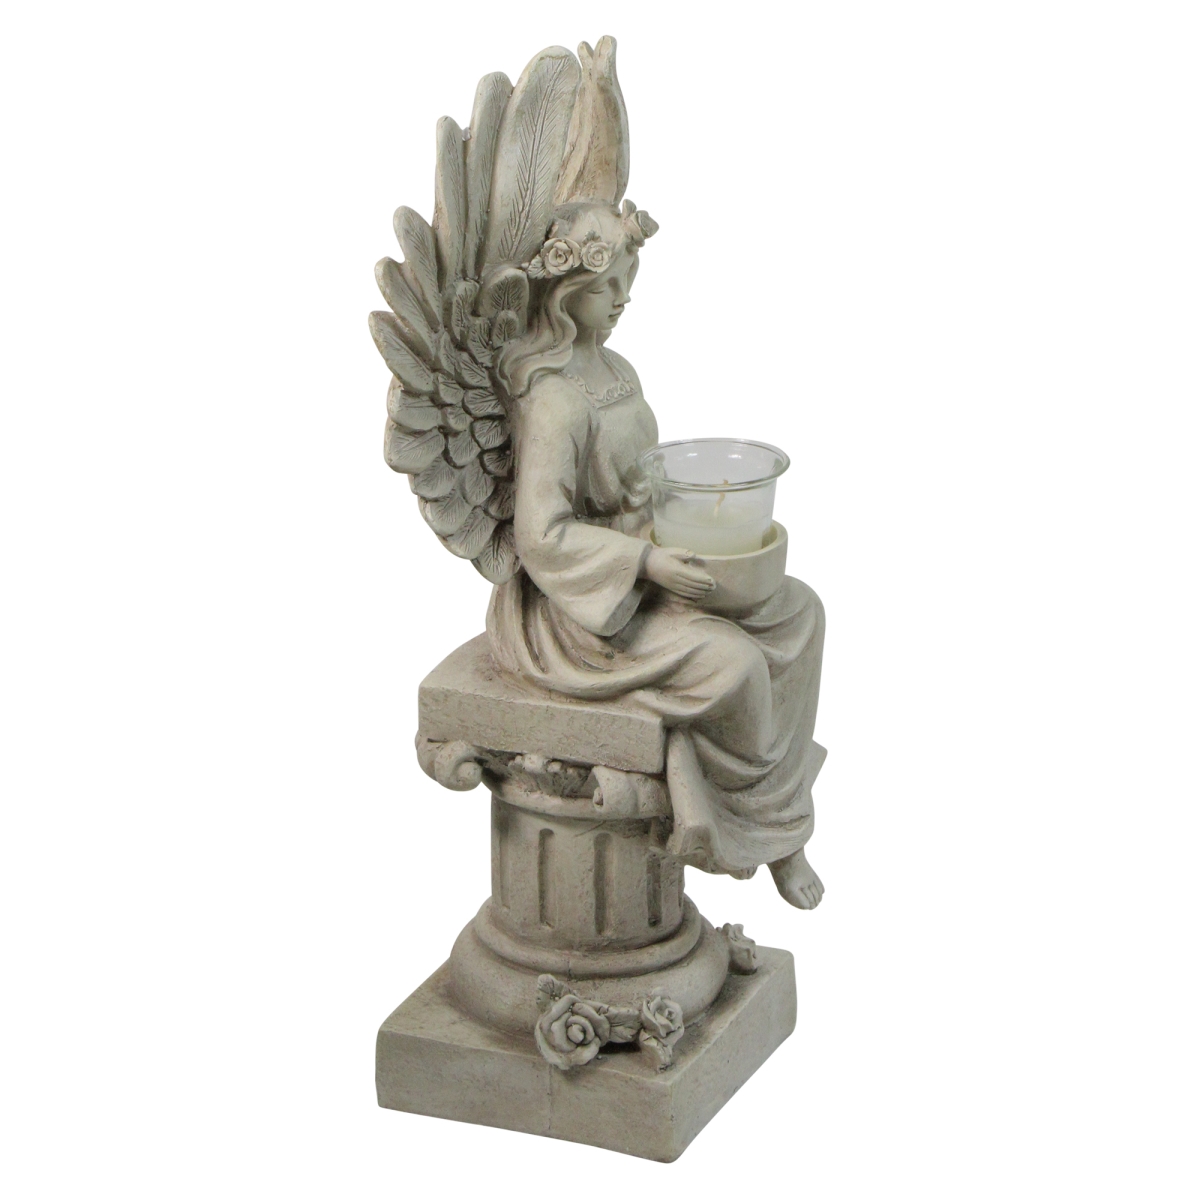 33377762 17 In. Peaceful Angel Sitting On A Pedastal Candle Holder Statue